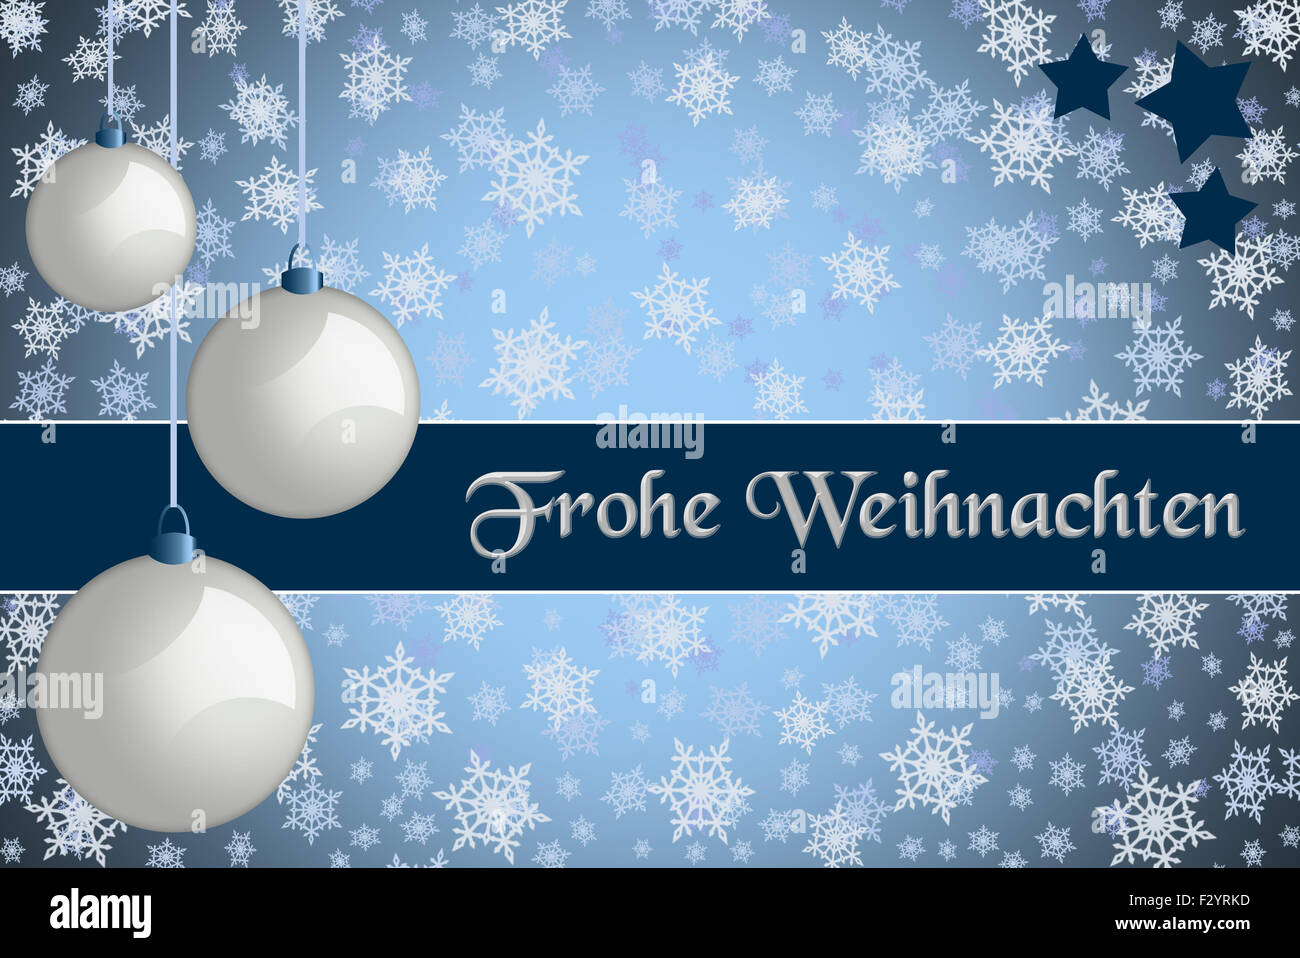 Christmas greeting card. 'Frohe Weihnachten' Blue colored Christmas card with retro white baubles and snowflake background. Stock Photo